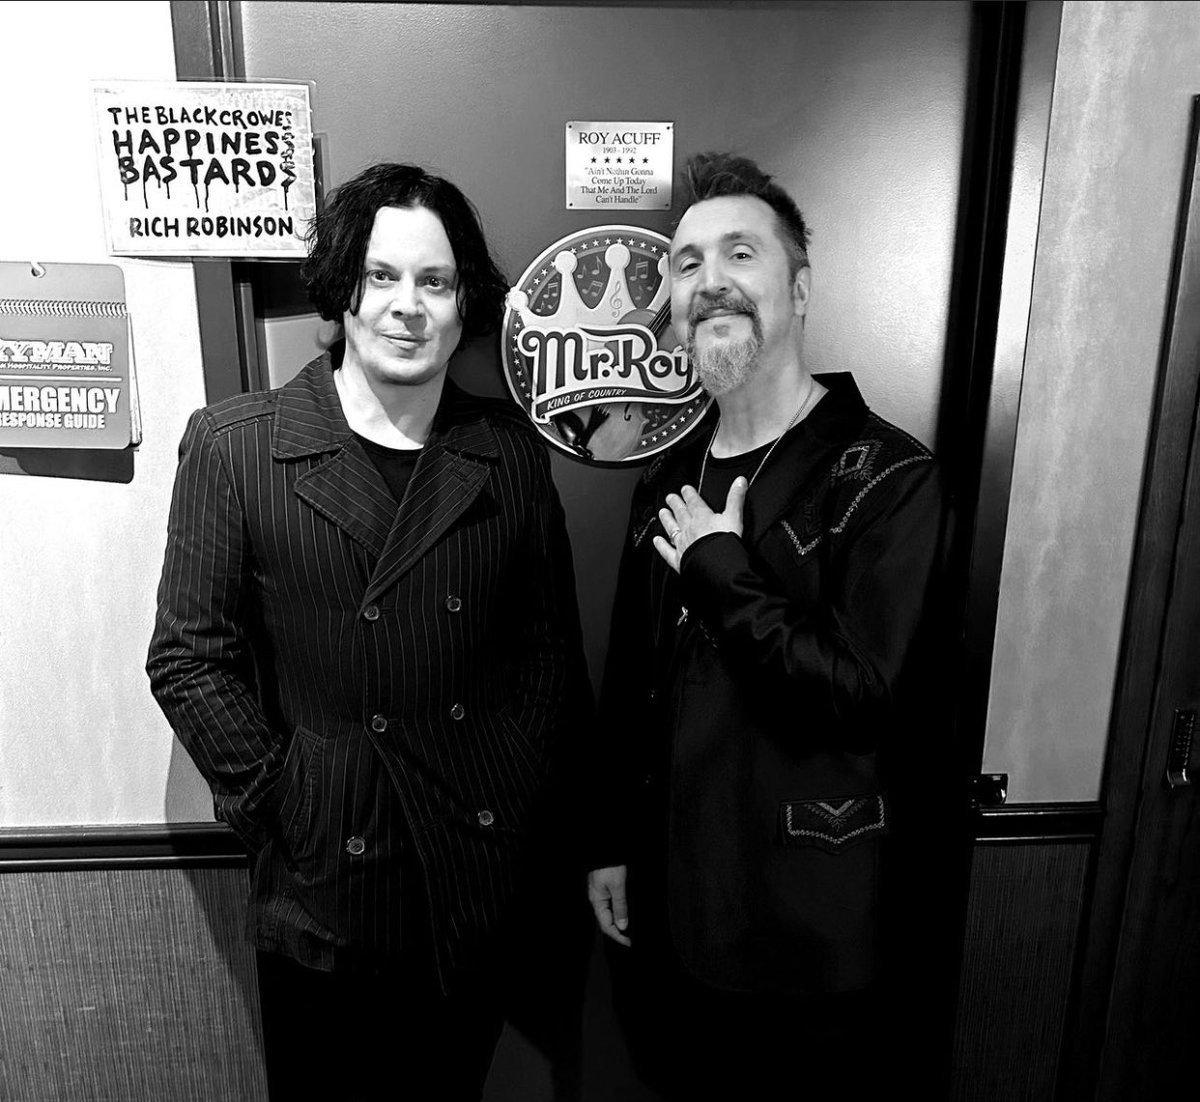 Had a lovely hang w #jackwhite at #theblackcrowes opening night #thegrandoldopry #oliviajean had a great set too! How do I even thank this guy for telling the world about #the500lbsrecord #thirdmanrecords #jackwhiteofficial